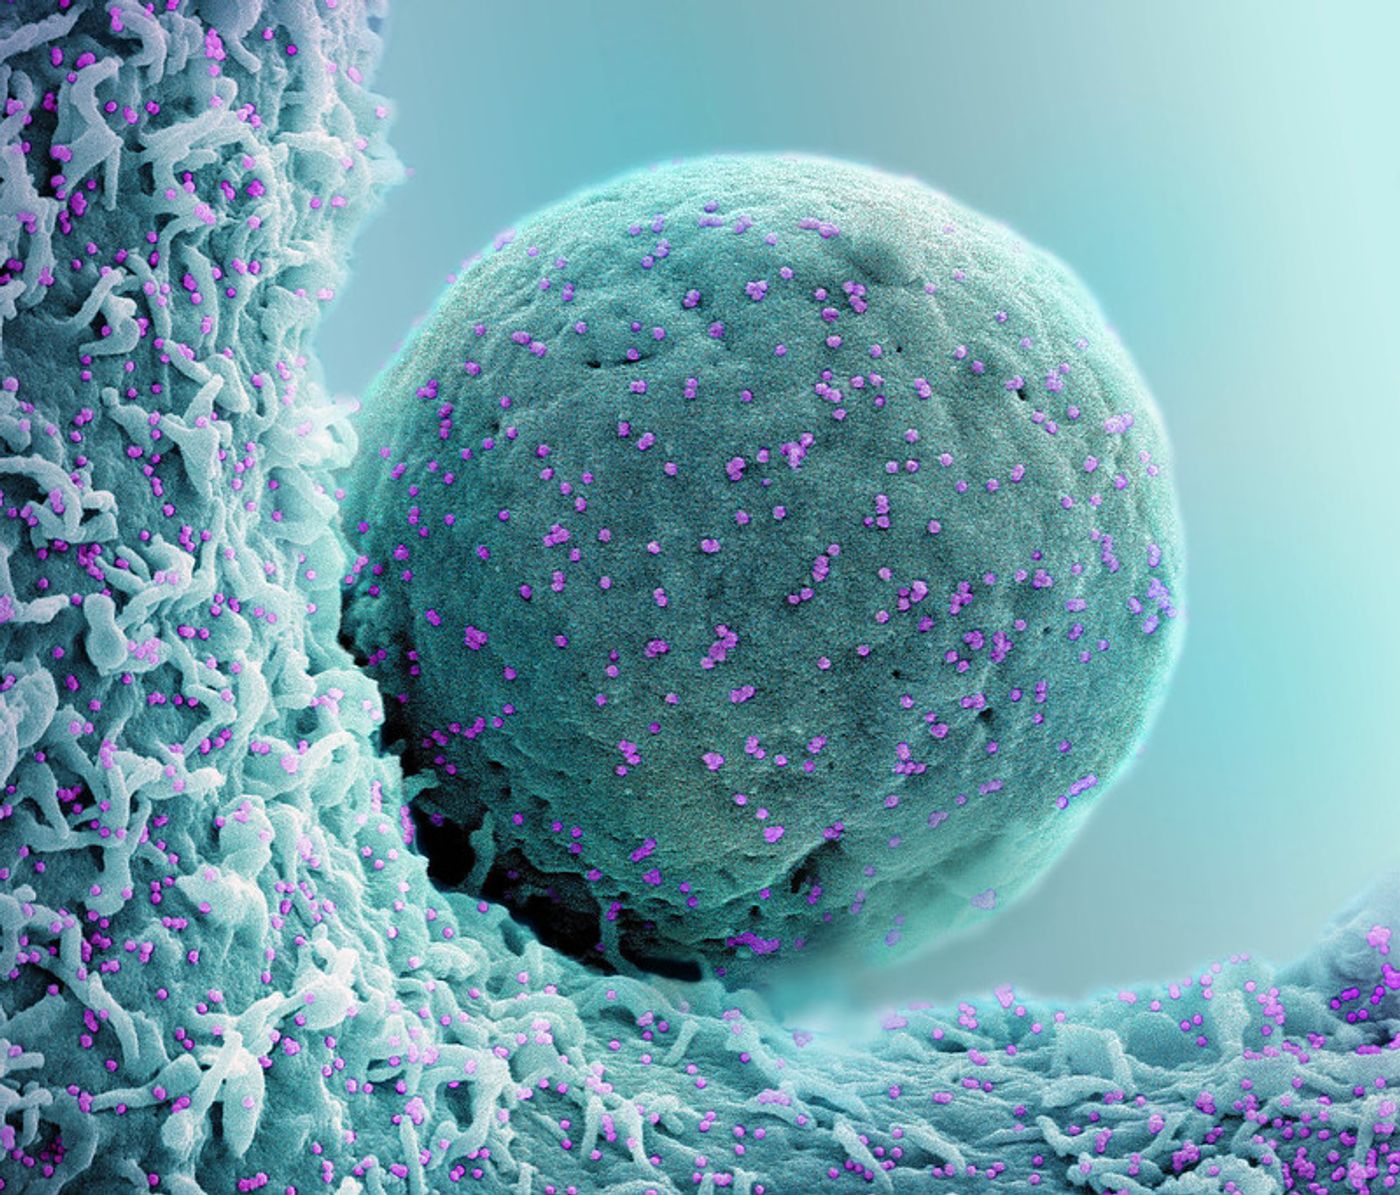 Colorized scanning electron micrograph of a cell (teal) infected with the Omicron strain of SARS-CoV-2 virus particles (purple), isolated from a patient sample. Image captured at the NIAID Integrated Research Facility (IRF) in Fort Detrick, Maryland. Credit: NIAID